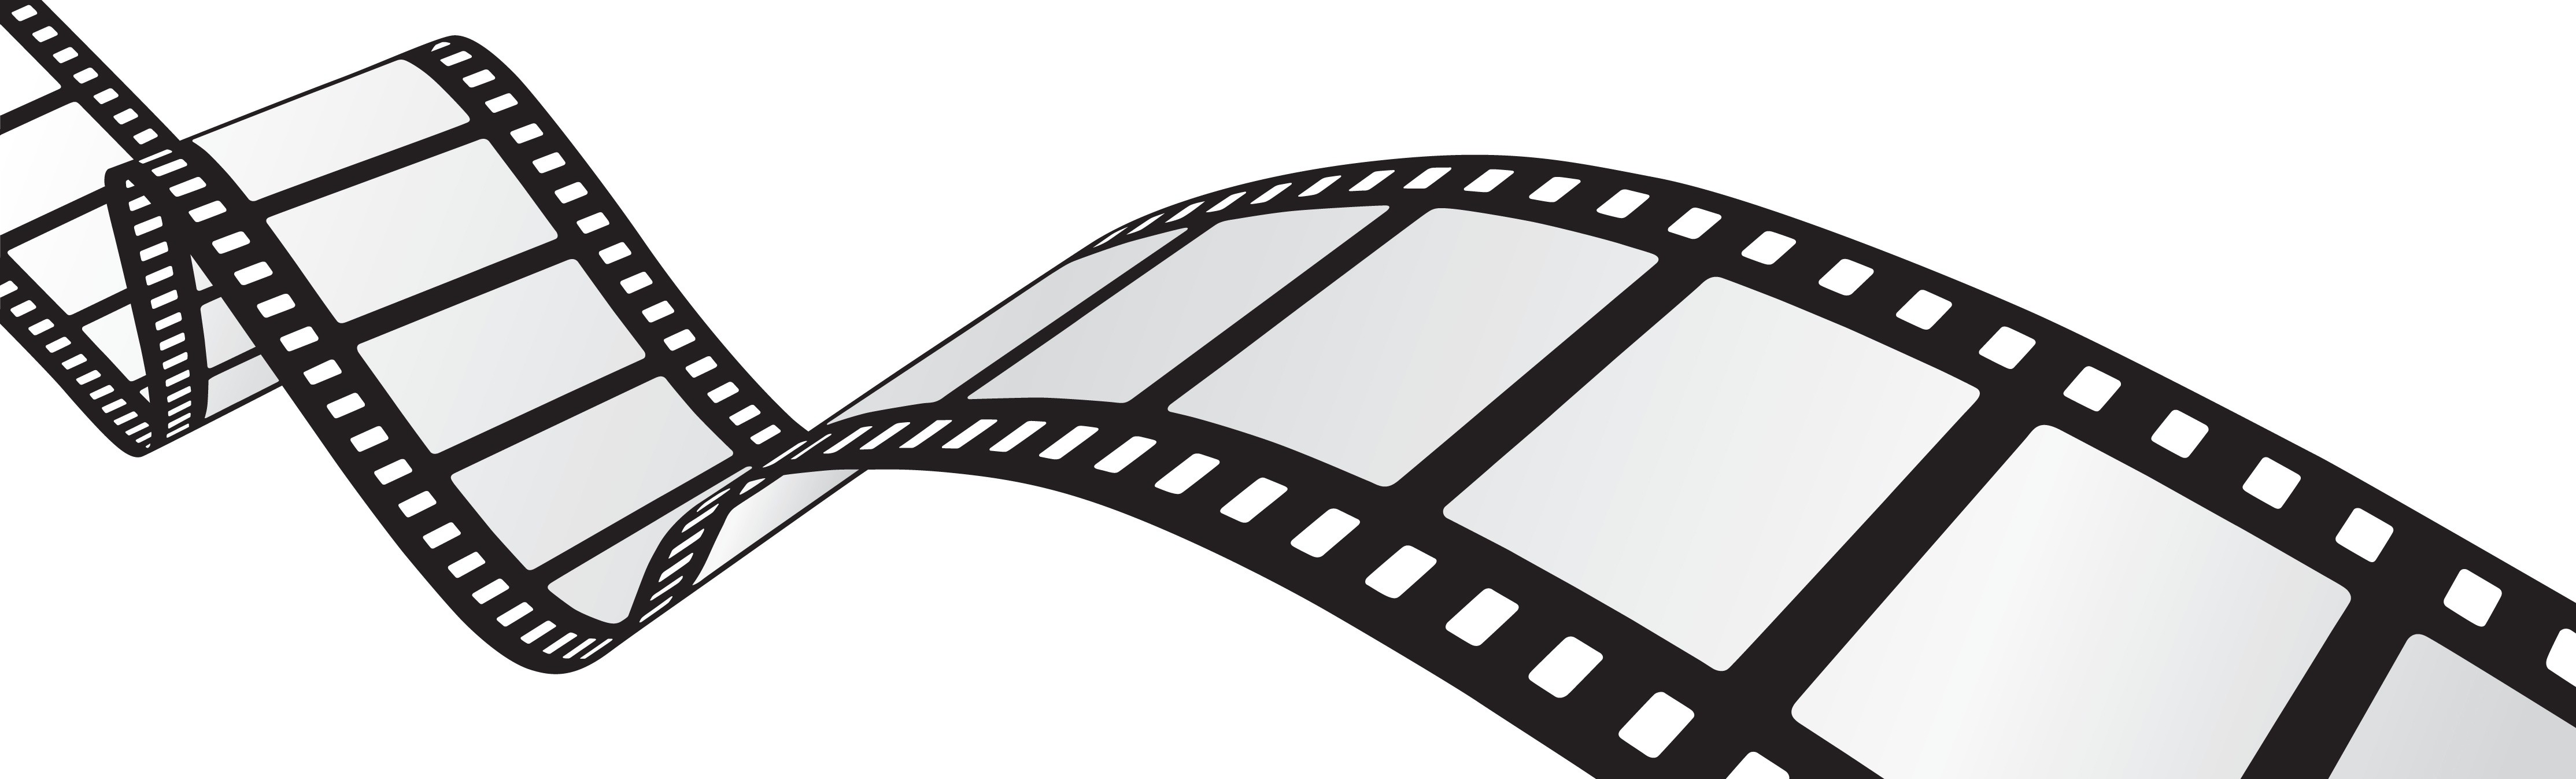 Movie Reel Png Pictures 5 HD Wallpapers | amagico.com - ClipArt ...